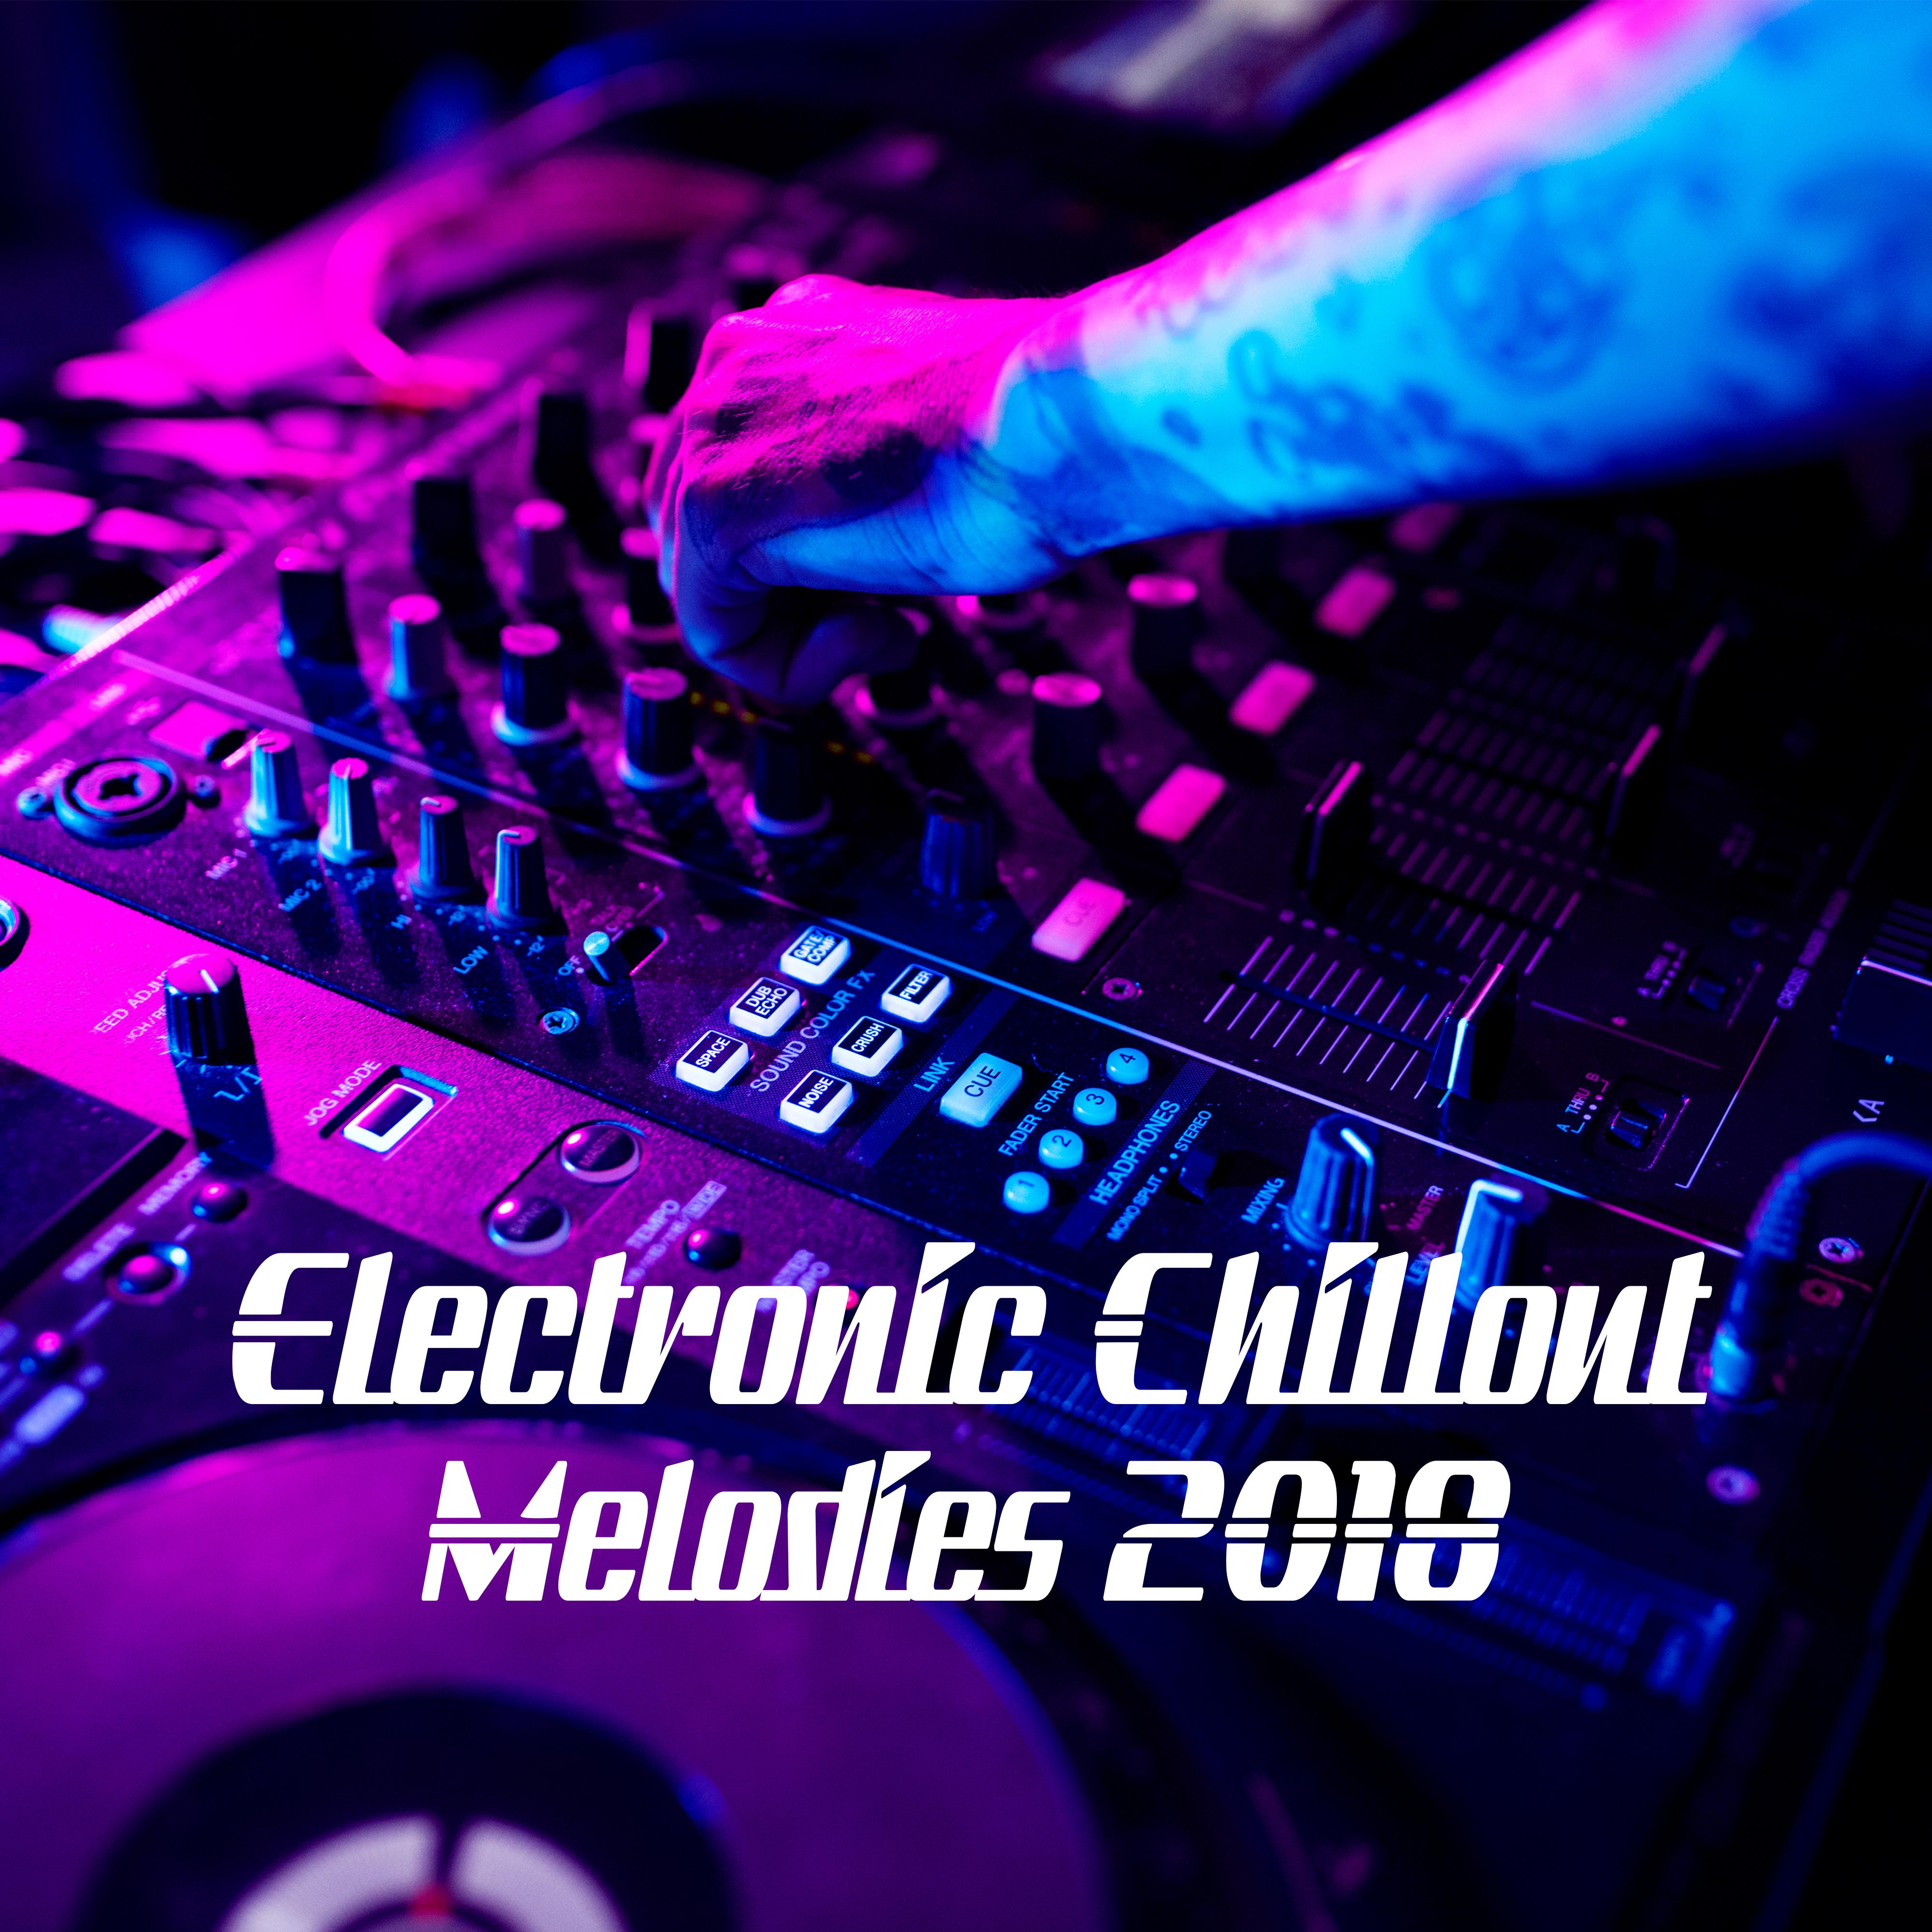 Electronic Chillout Melodies 2018